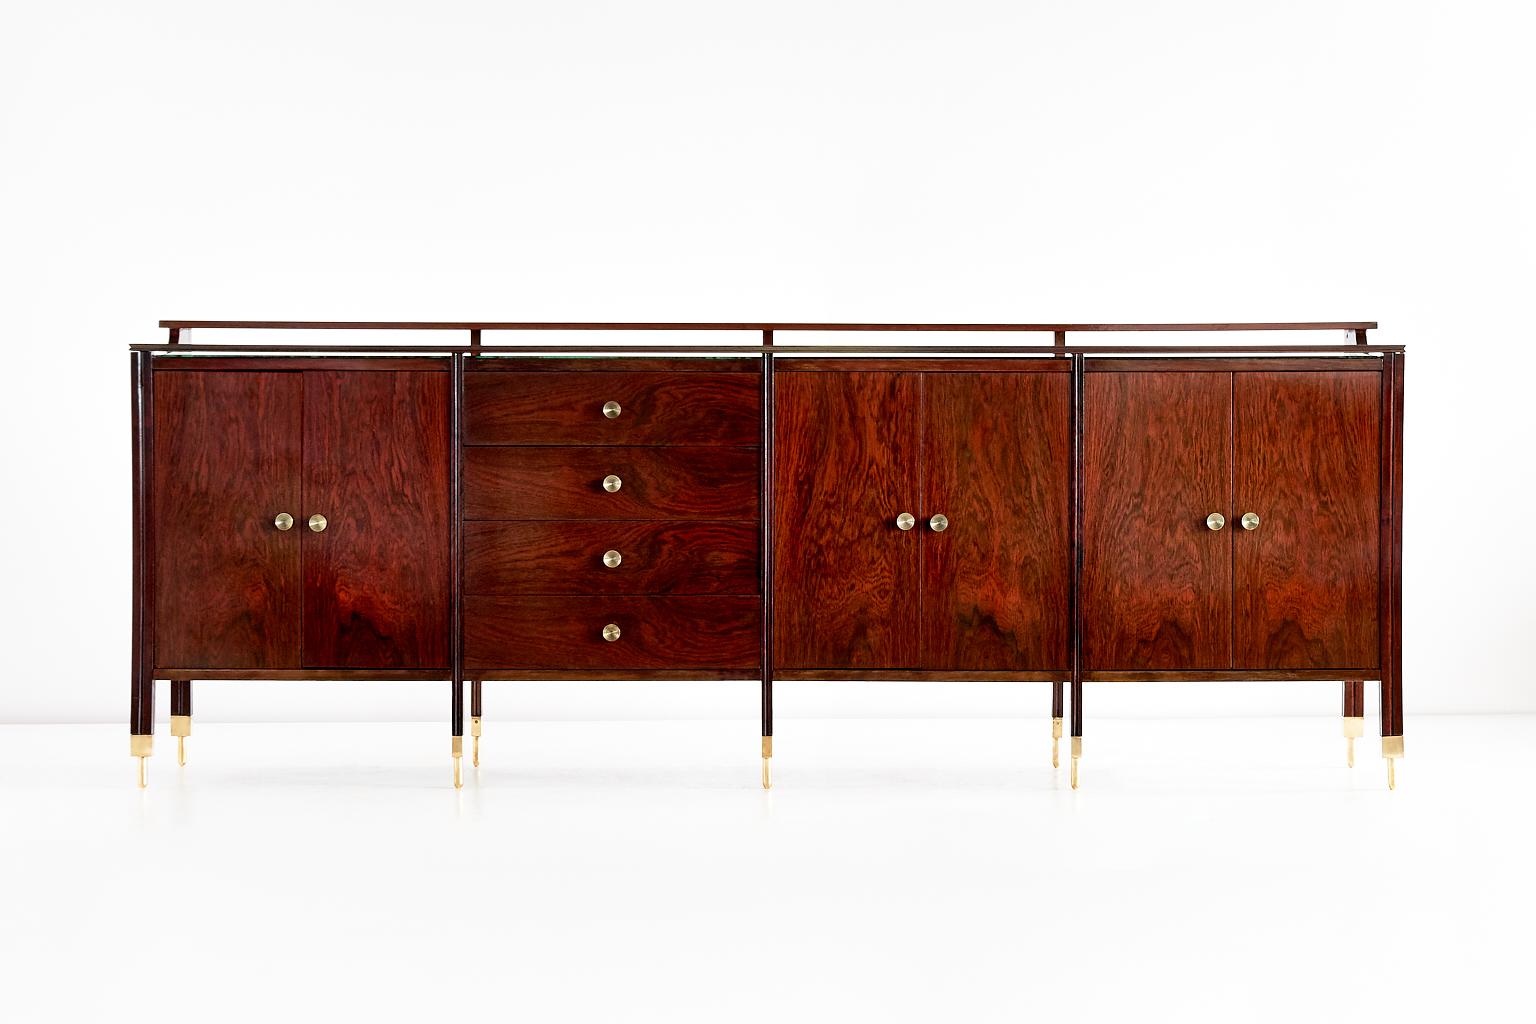 This rosewood sideboard/credenza was designed by Carlo de Carli and produced by Sormani in 1964. The large sideboard is executed in a combination of solid and veneered rosewood. The particularly striking brass feet and handles give the piece a light